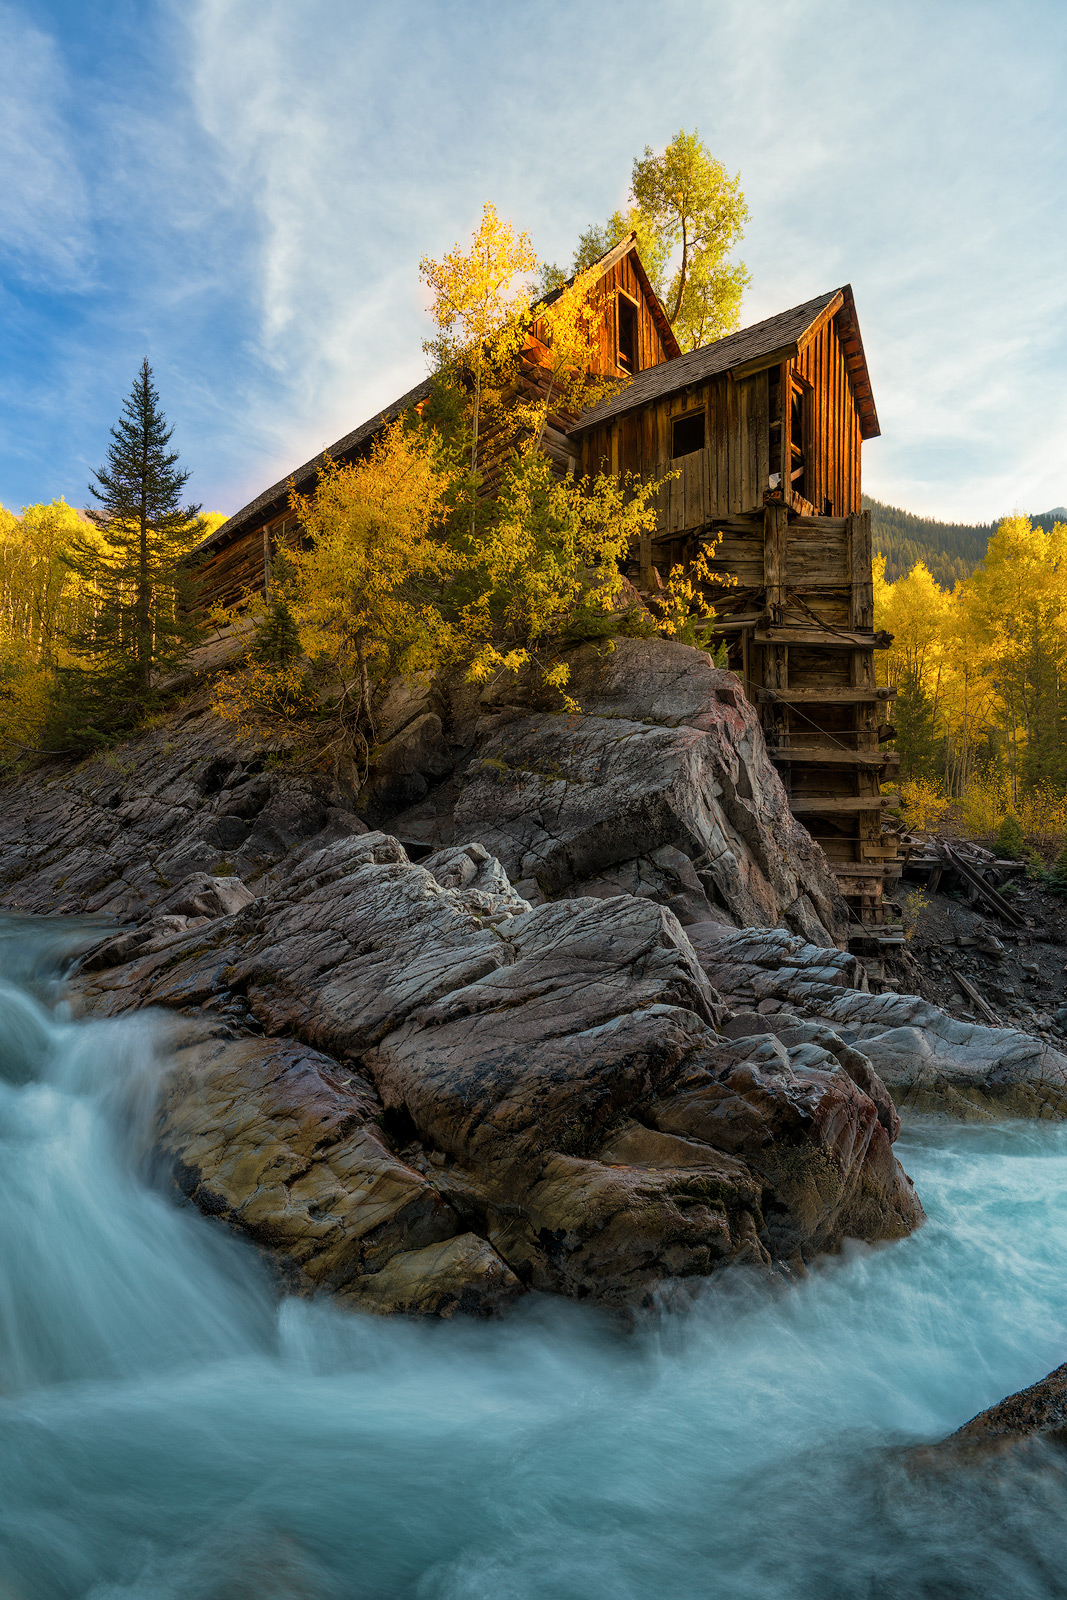 Crystal Mill, Colorado, Spring, waterfall, old structure, marble, mountains, snow, aspen, golden, famous, photos, location, autumn...